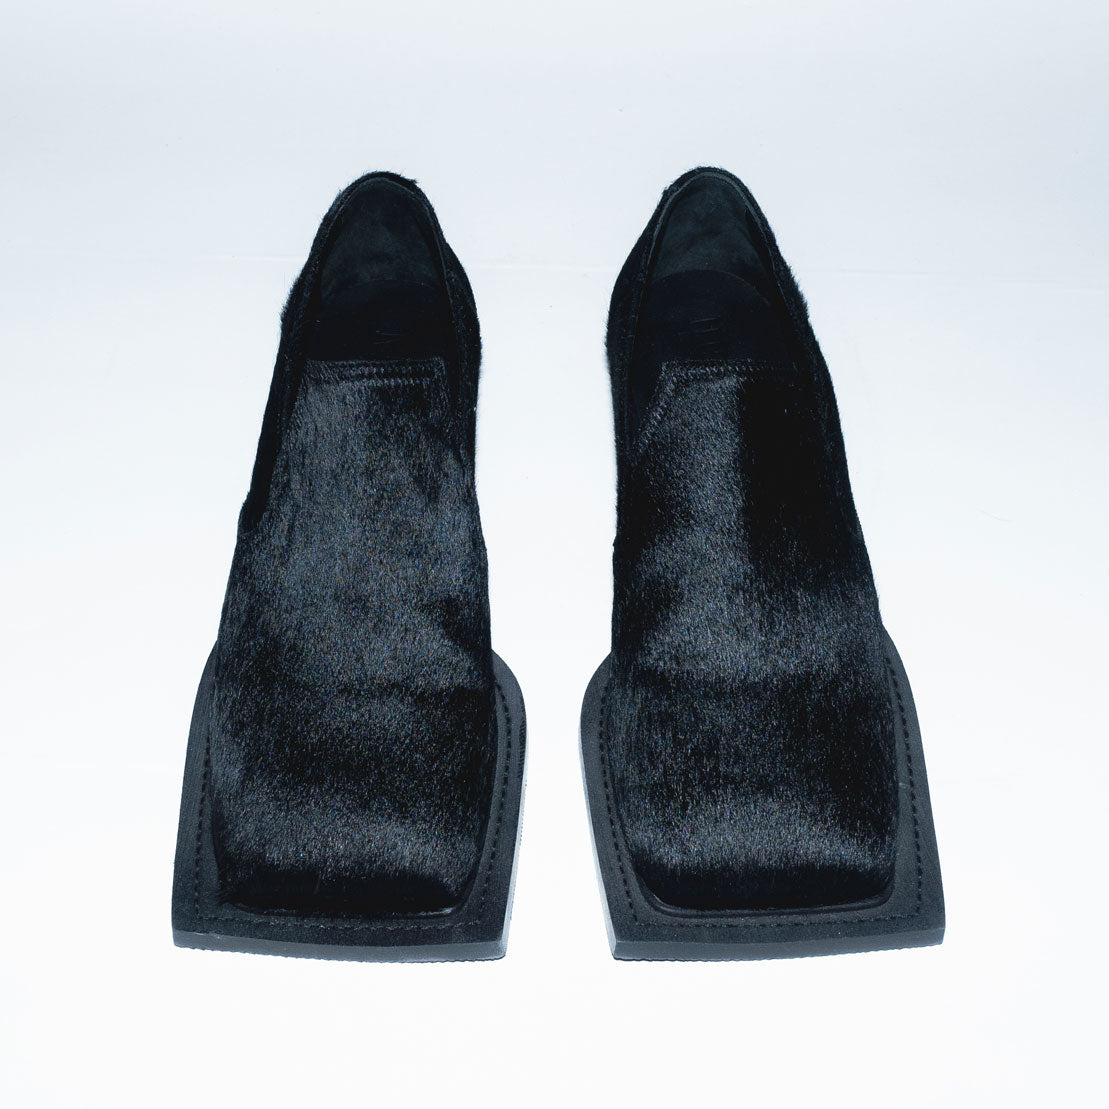 Howled Loafers in Cow Hair Black